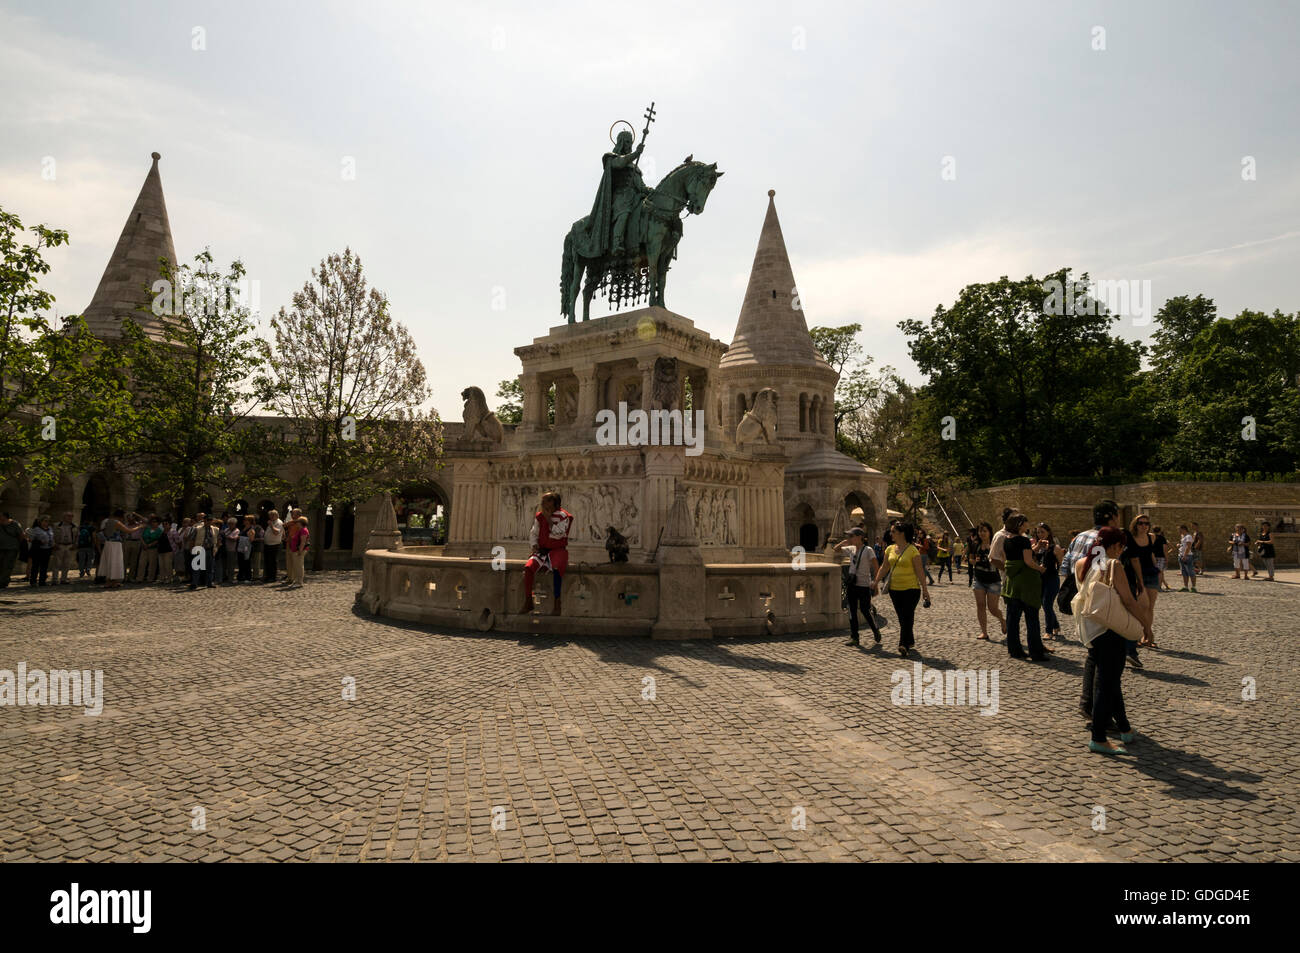 An equestrian statue of Saint Stephen, Grand Prince of the Hungarians and the first King of Hungary in the Fishermen's Bastion cl Stock Photo